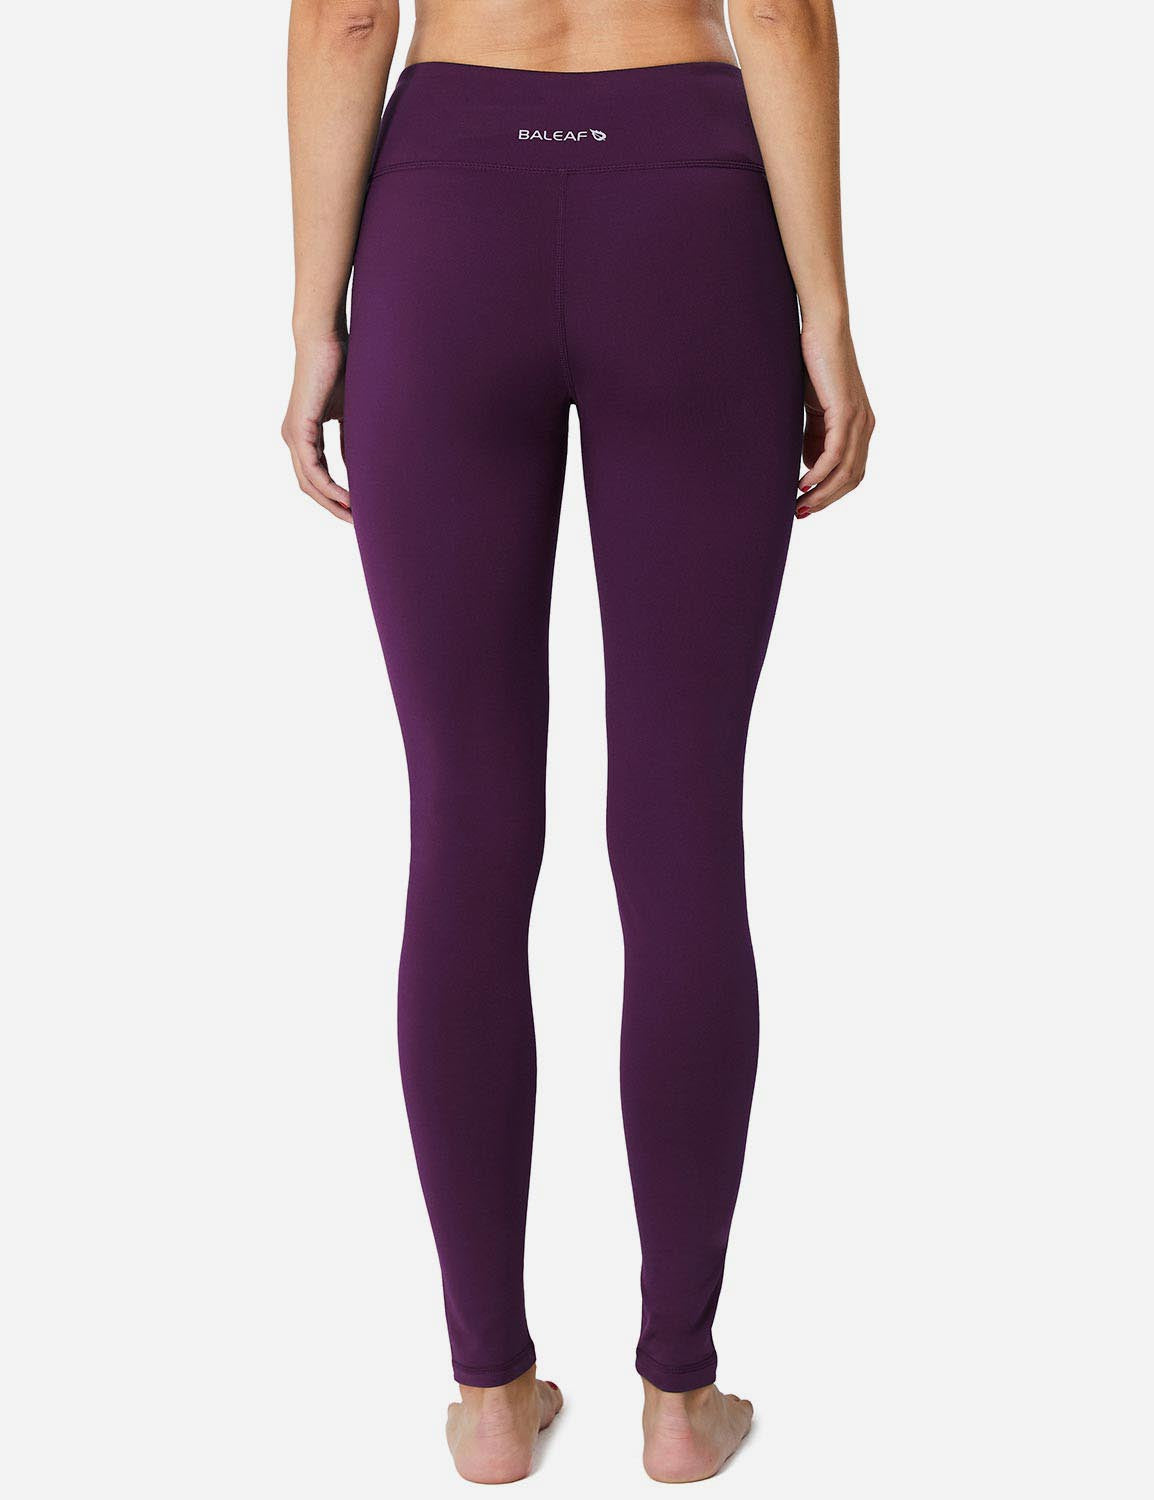 Leggings That Aren't See Through Ukulele  International Society of  Precision Agriculture